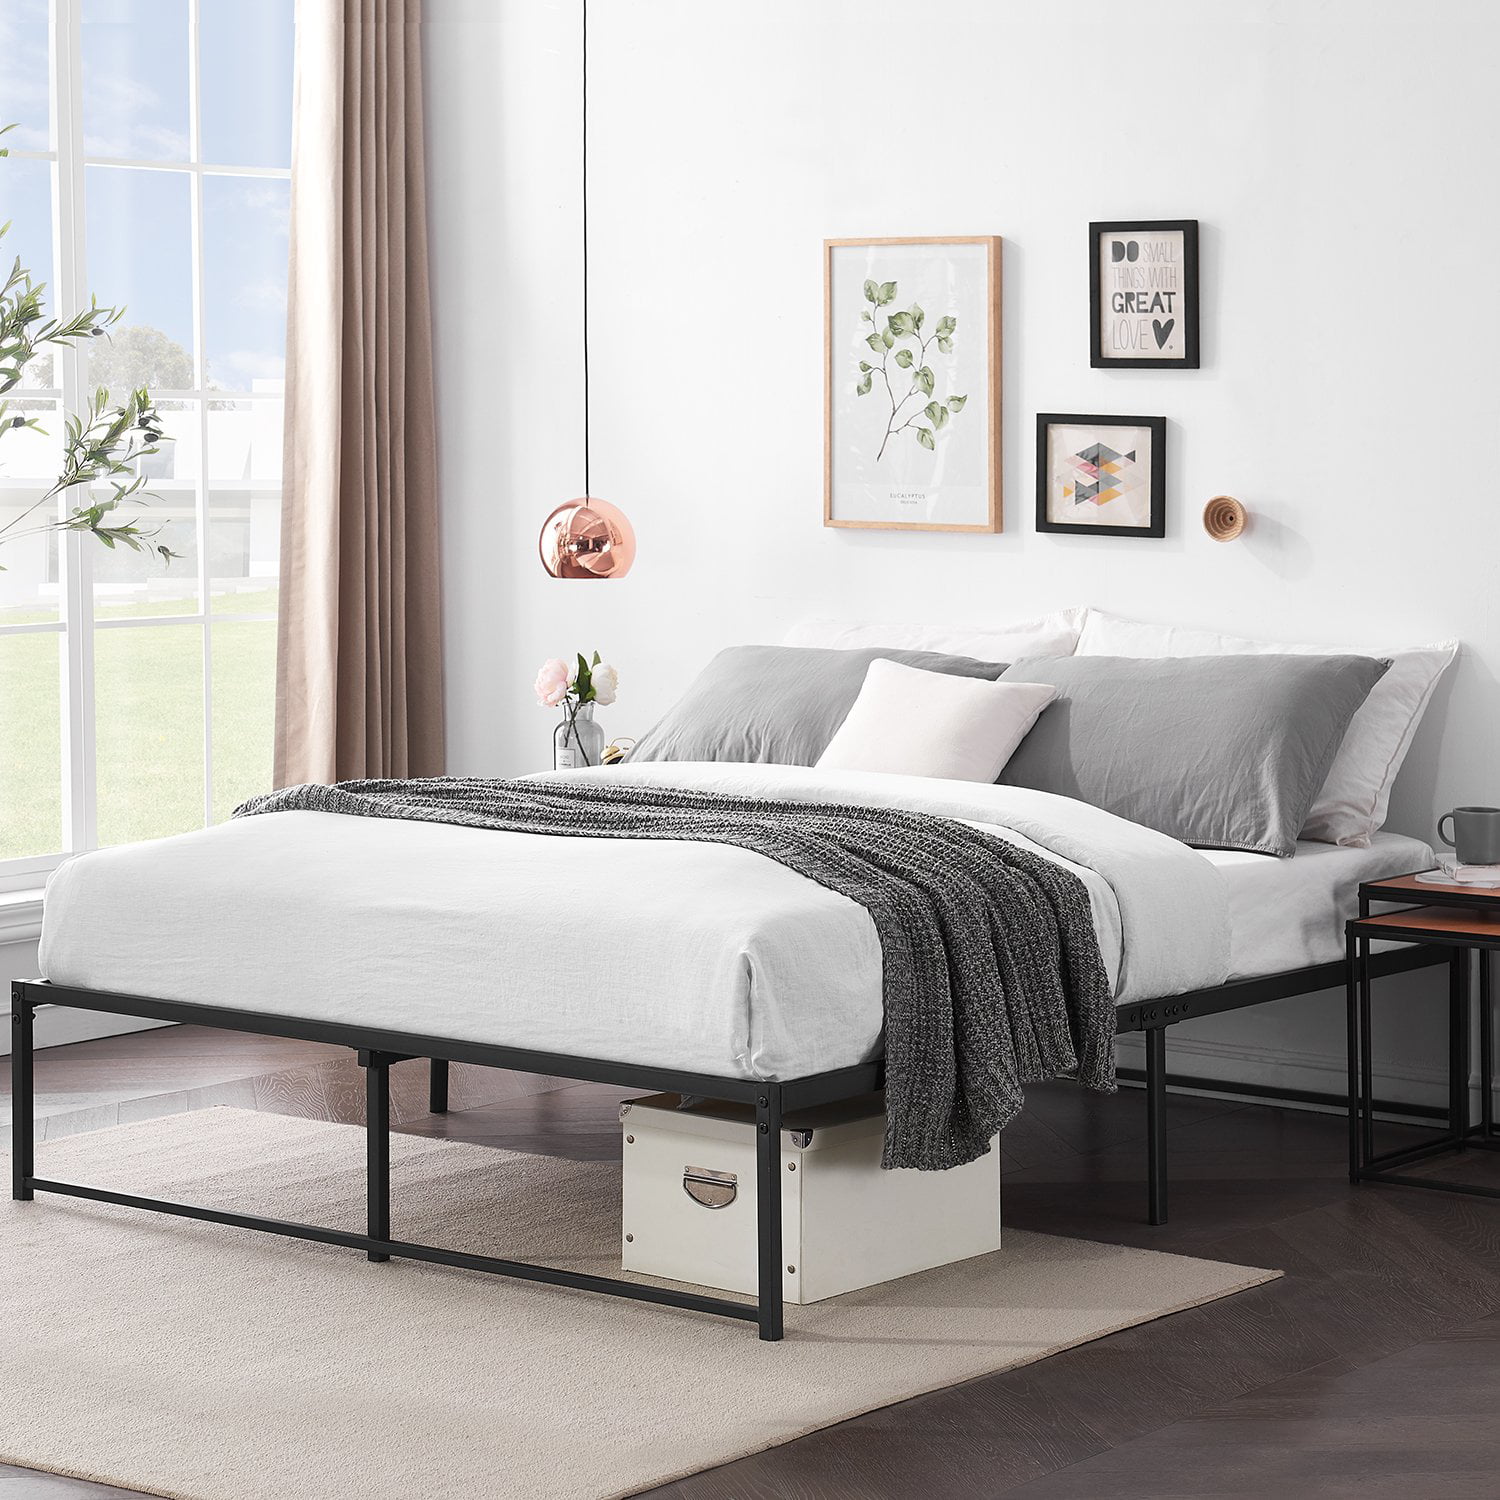 Metal Platform Bed Frame Full Size With, Storage Bed Frame Without Headboard